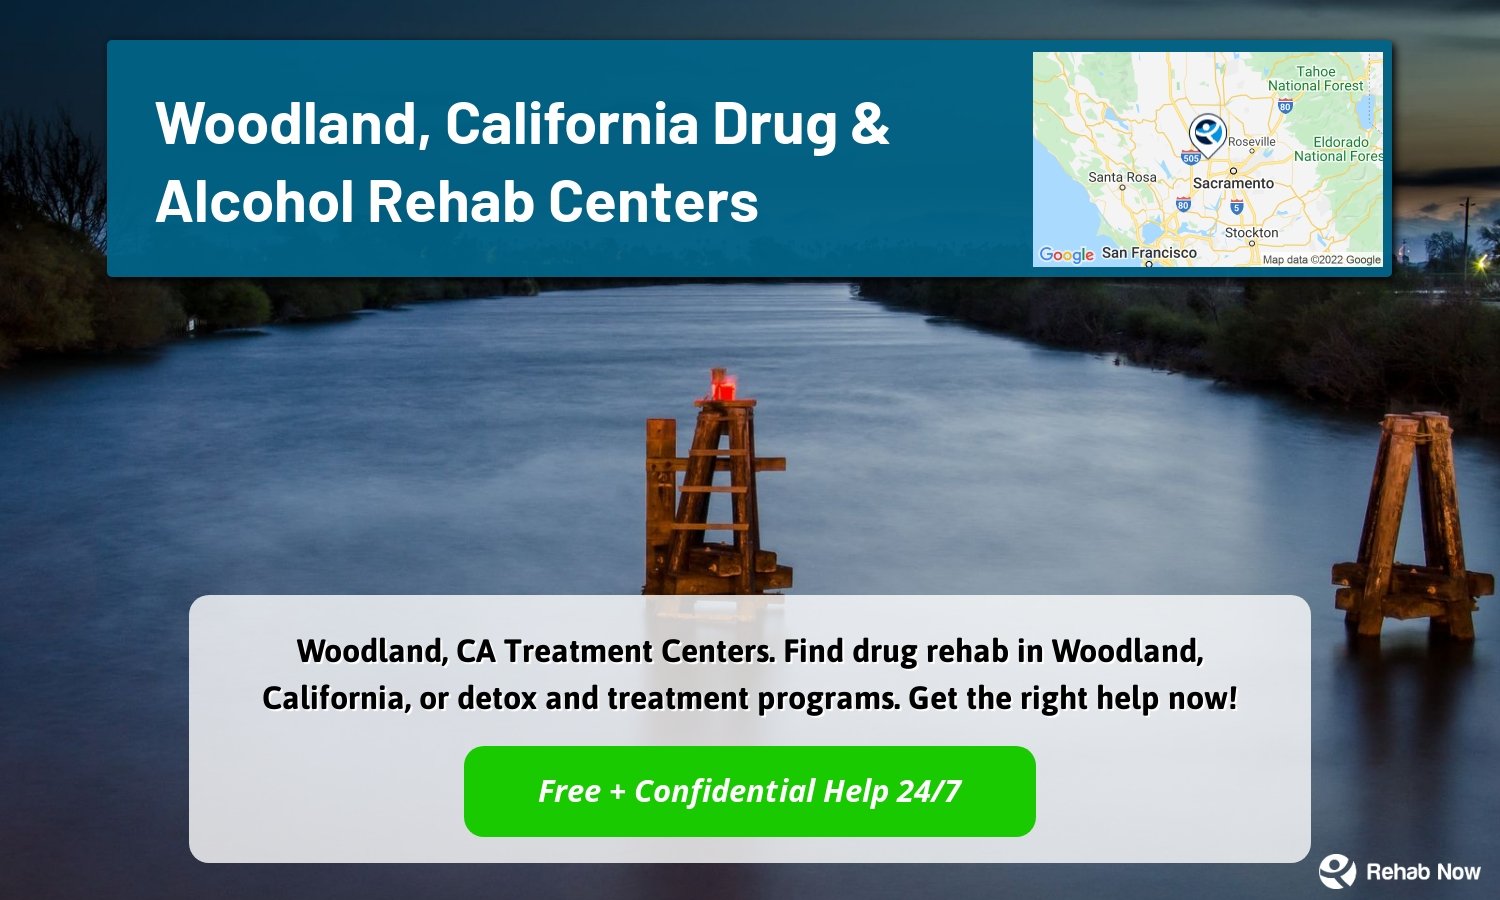 Woodland, CA Treatment Centers. Find drug rehab in Woodland, California, or detox and treatment programs. Get the right help now!